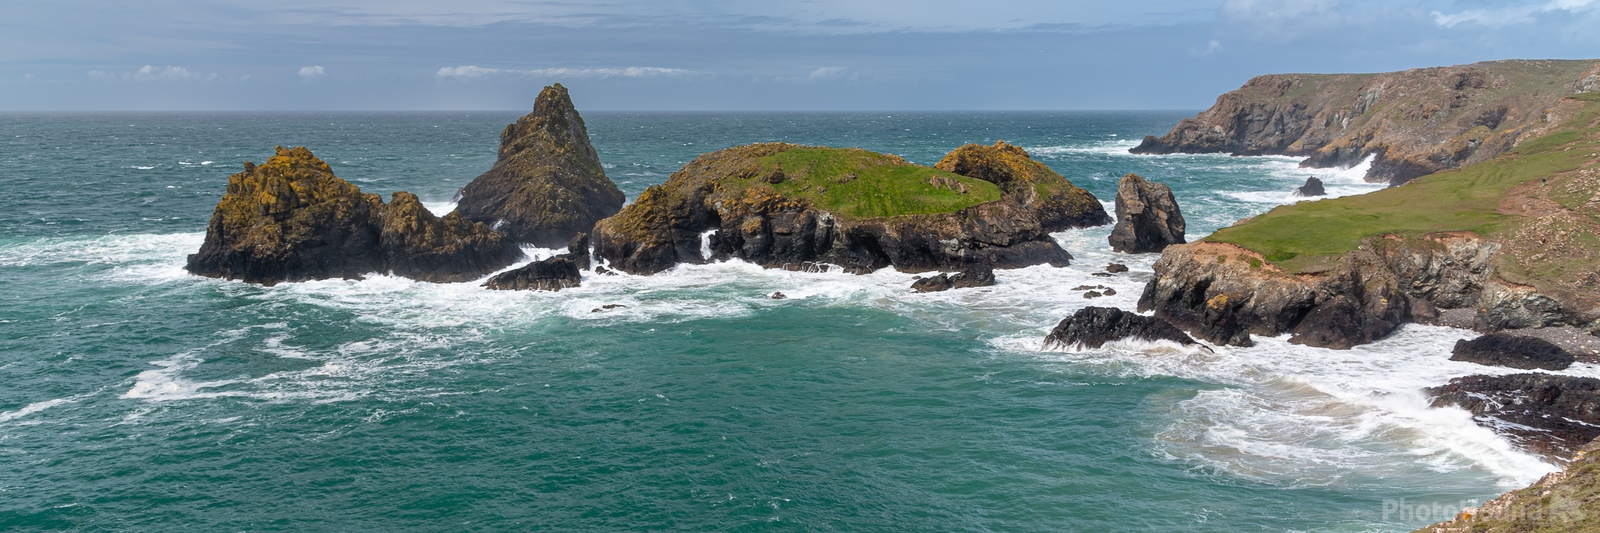 Image of Kynance Cove by Martin Stubbings